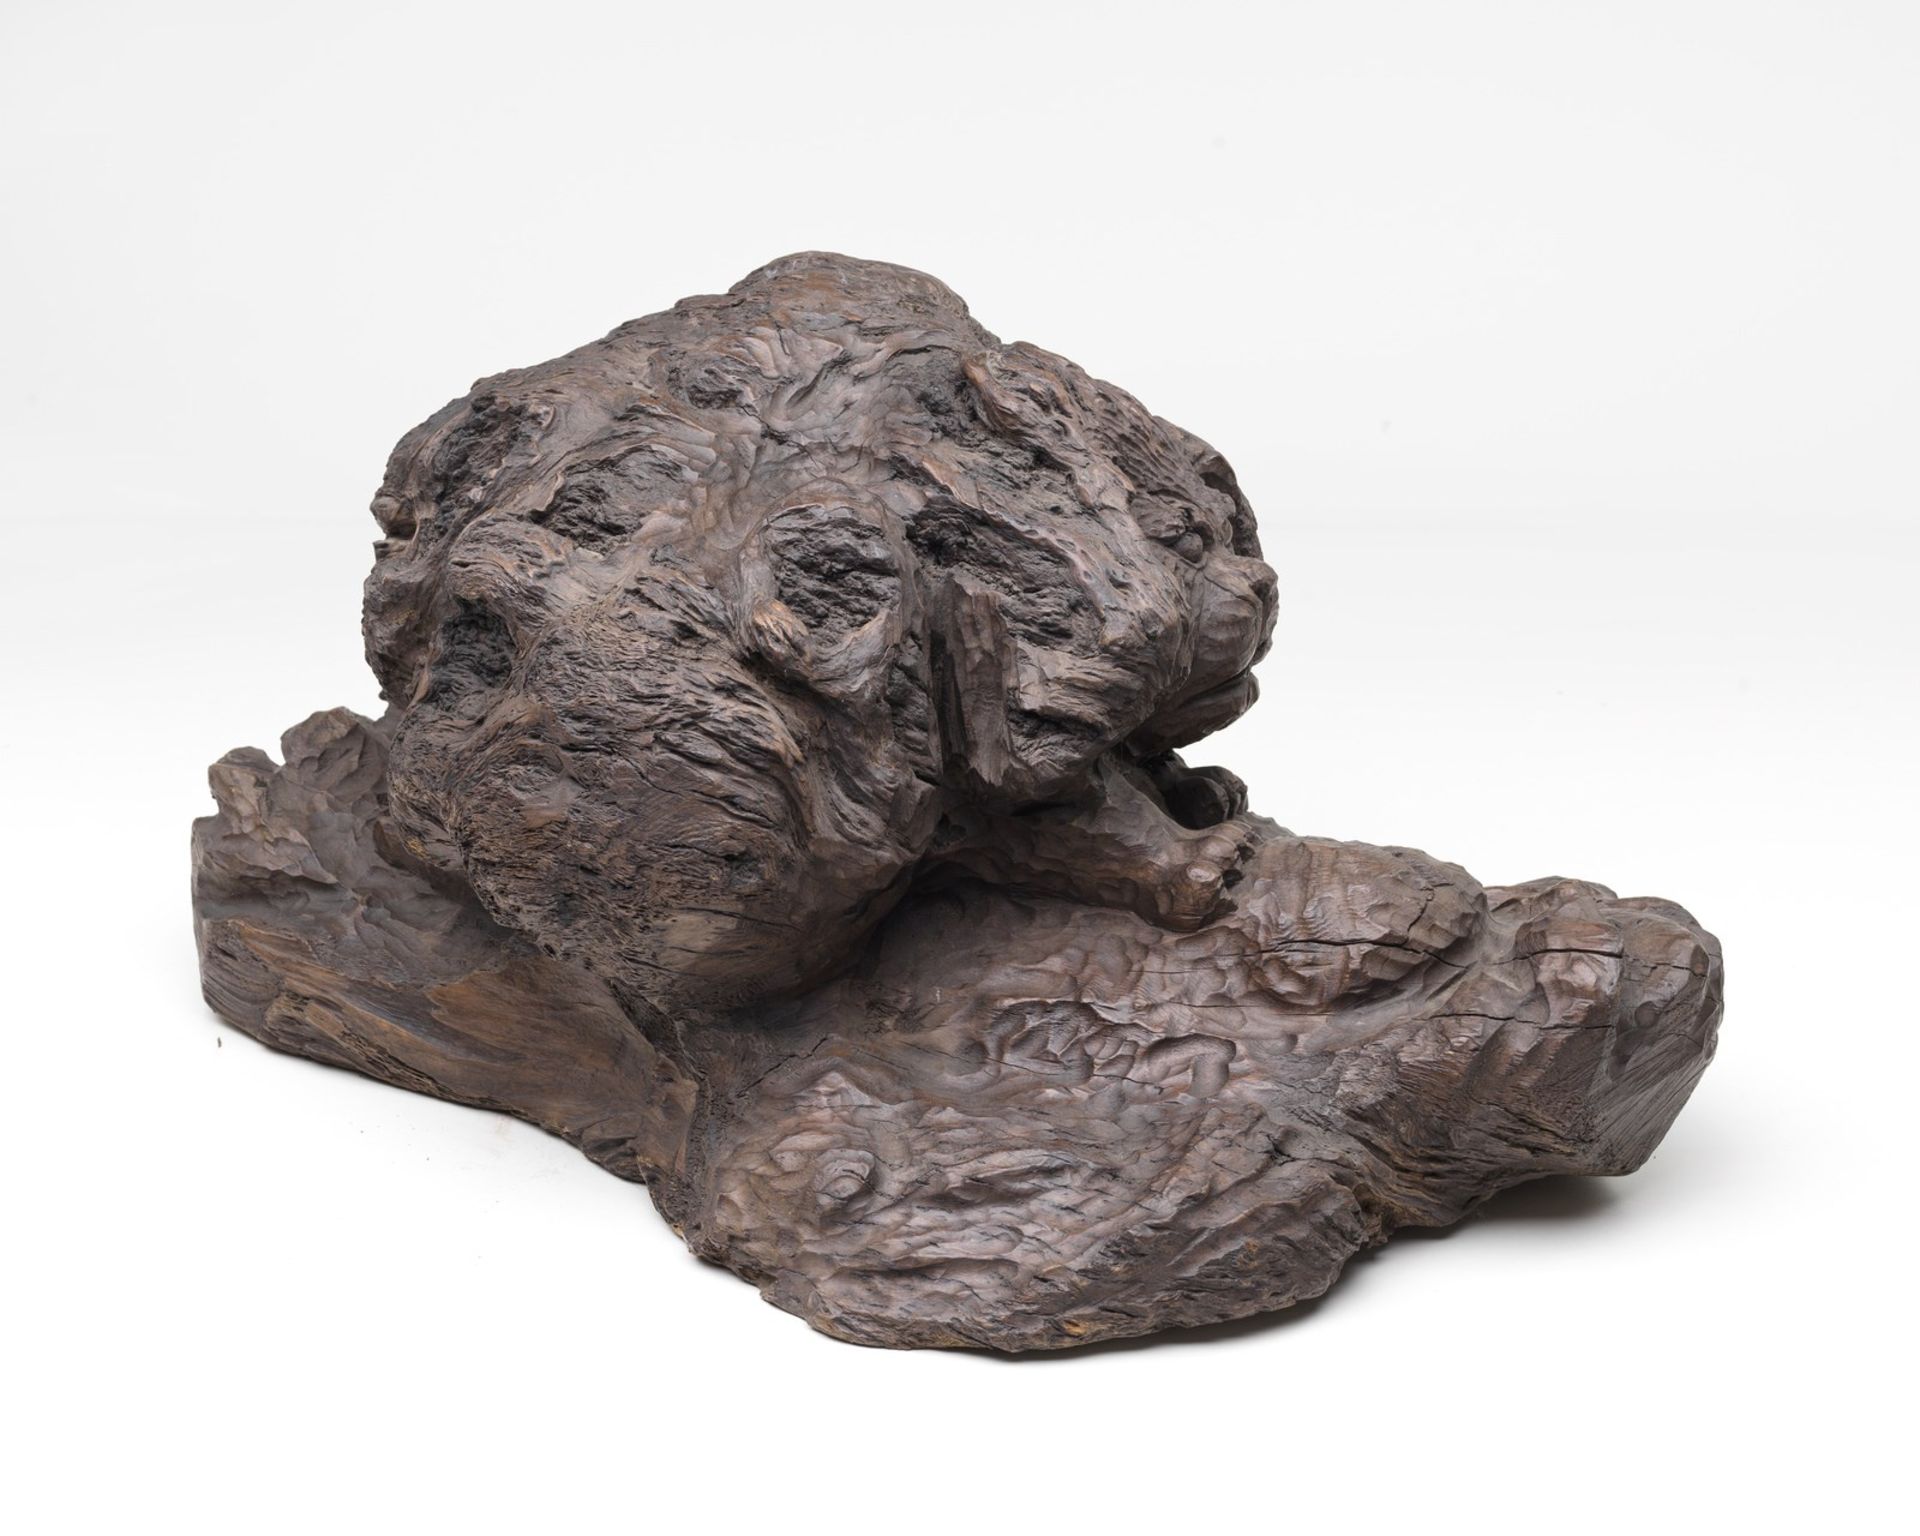 Naturalia A wooden root carved with the head of a snow lionTibet, 19th century. - Image 2 of 5